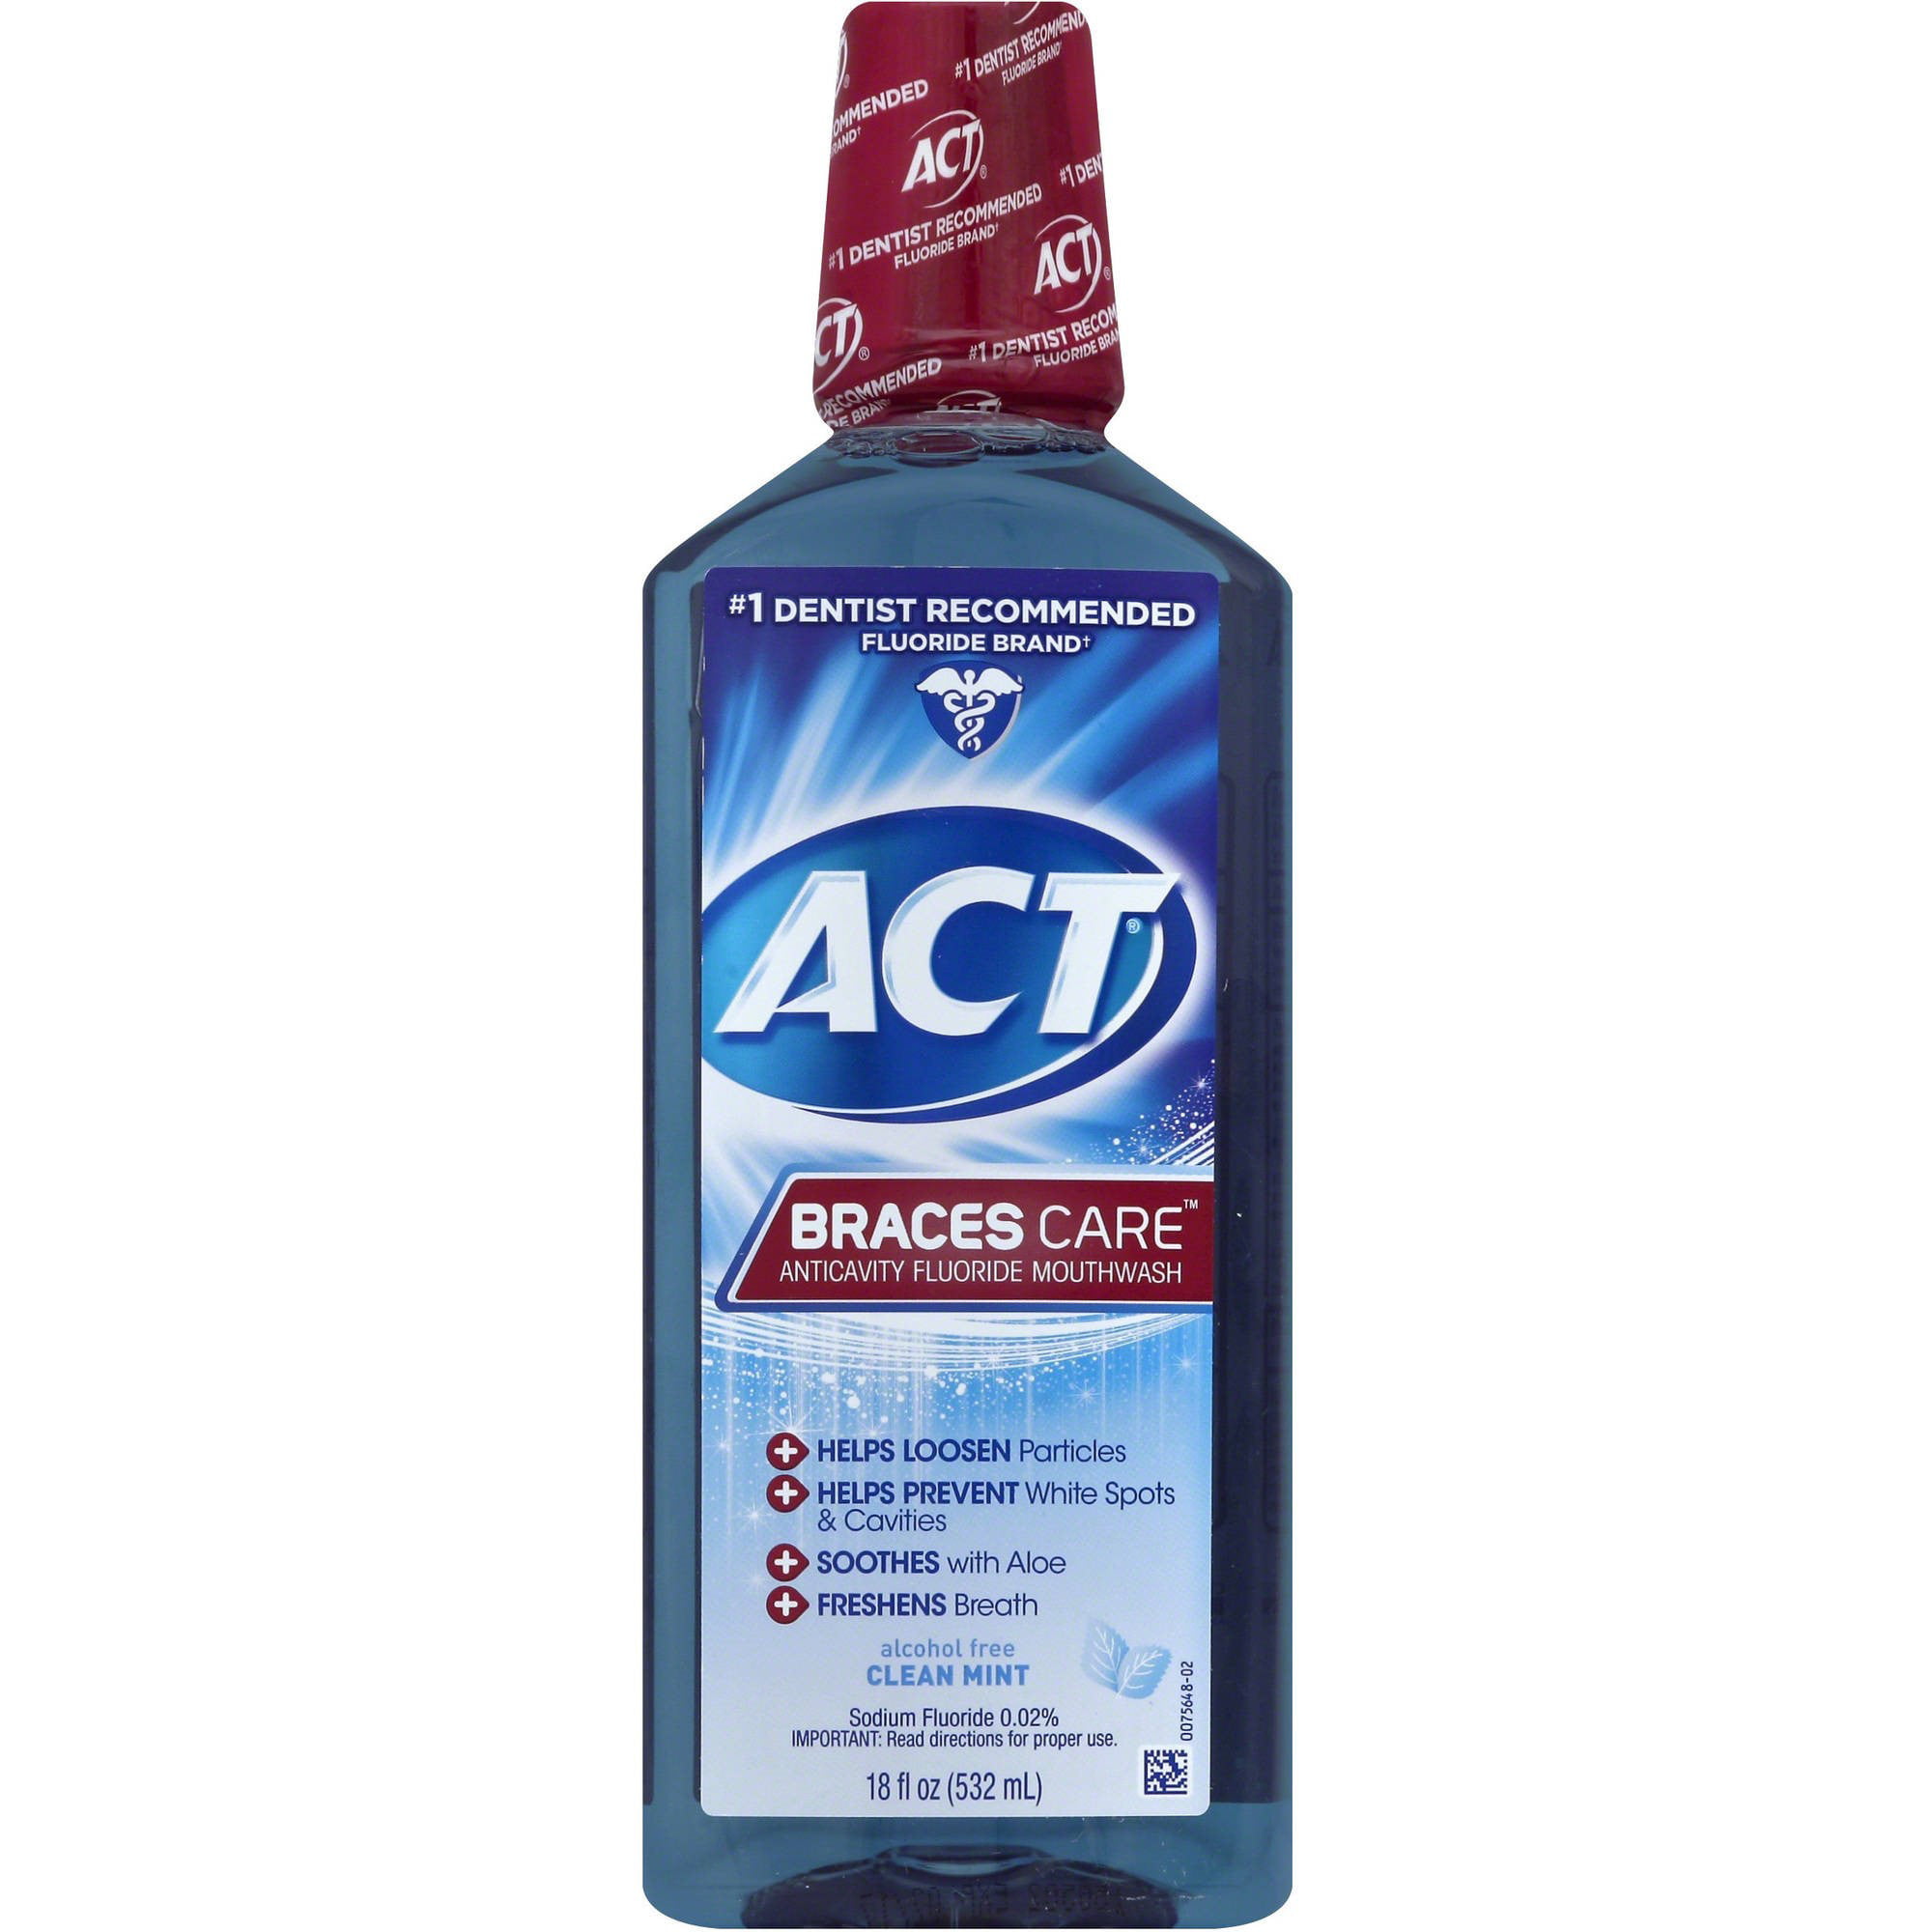 Buy (2 pack) ACT Braces Care Anticavity Fluoride Mouthwash, 18 Fl Oz at Wal...